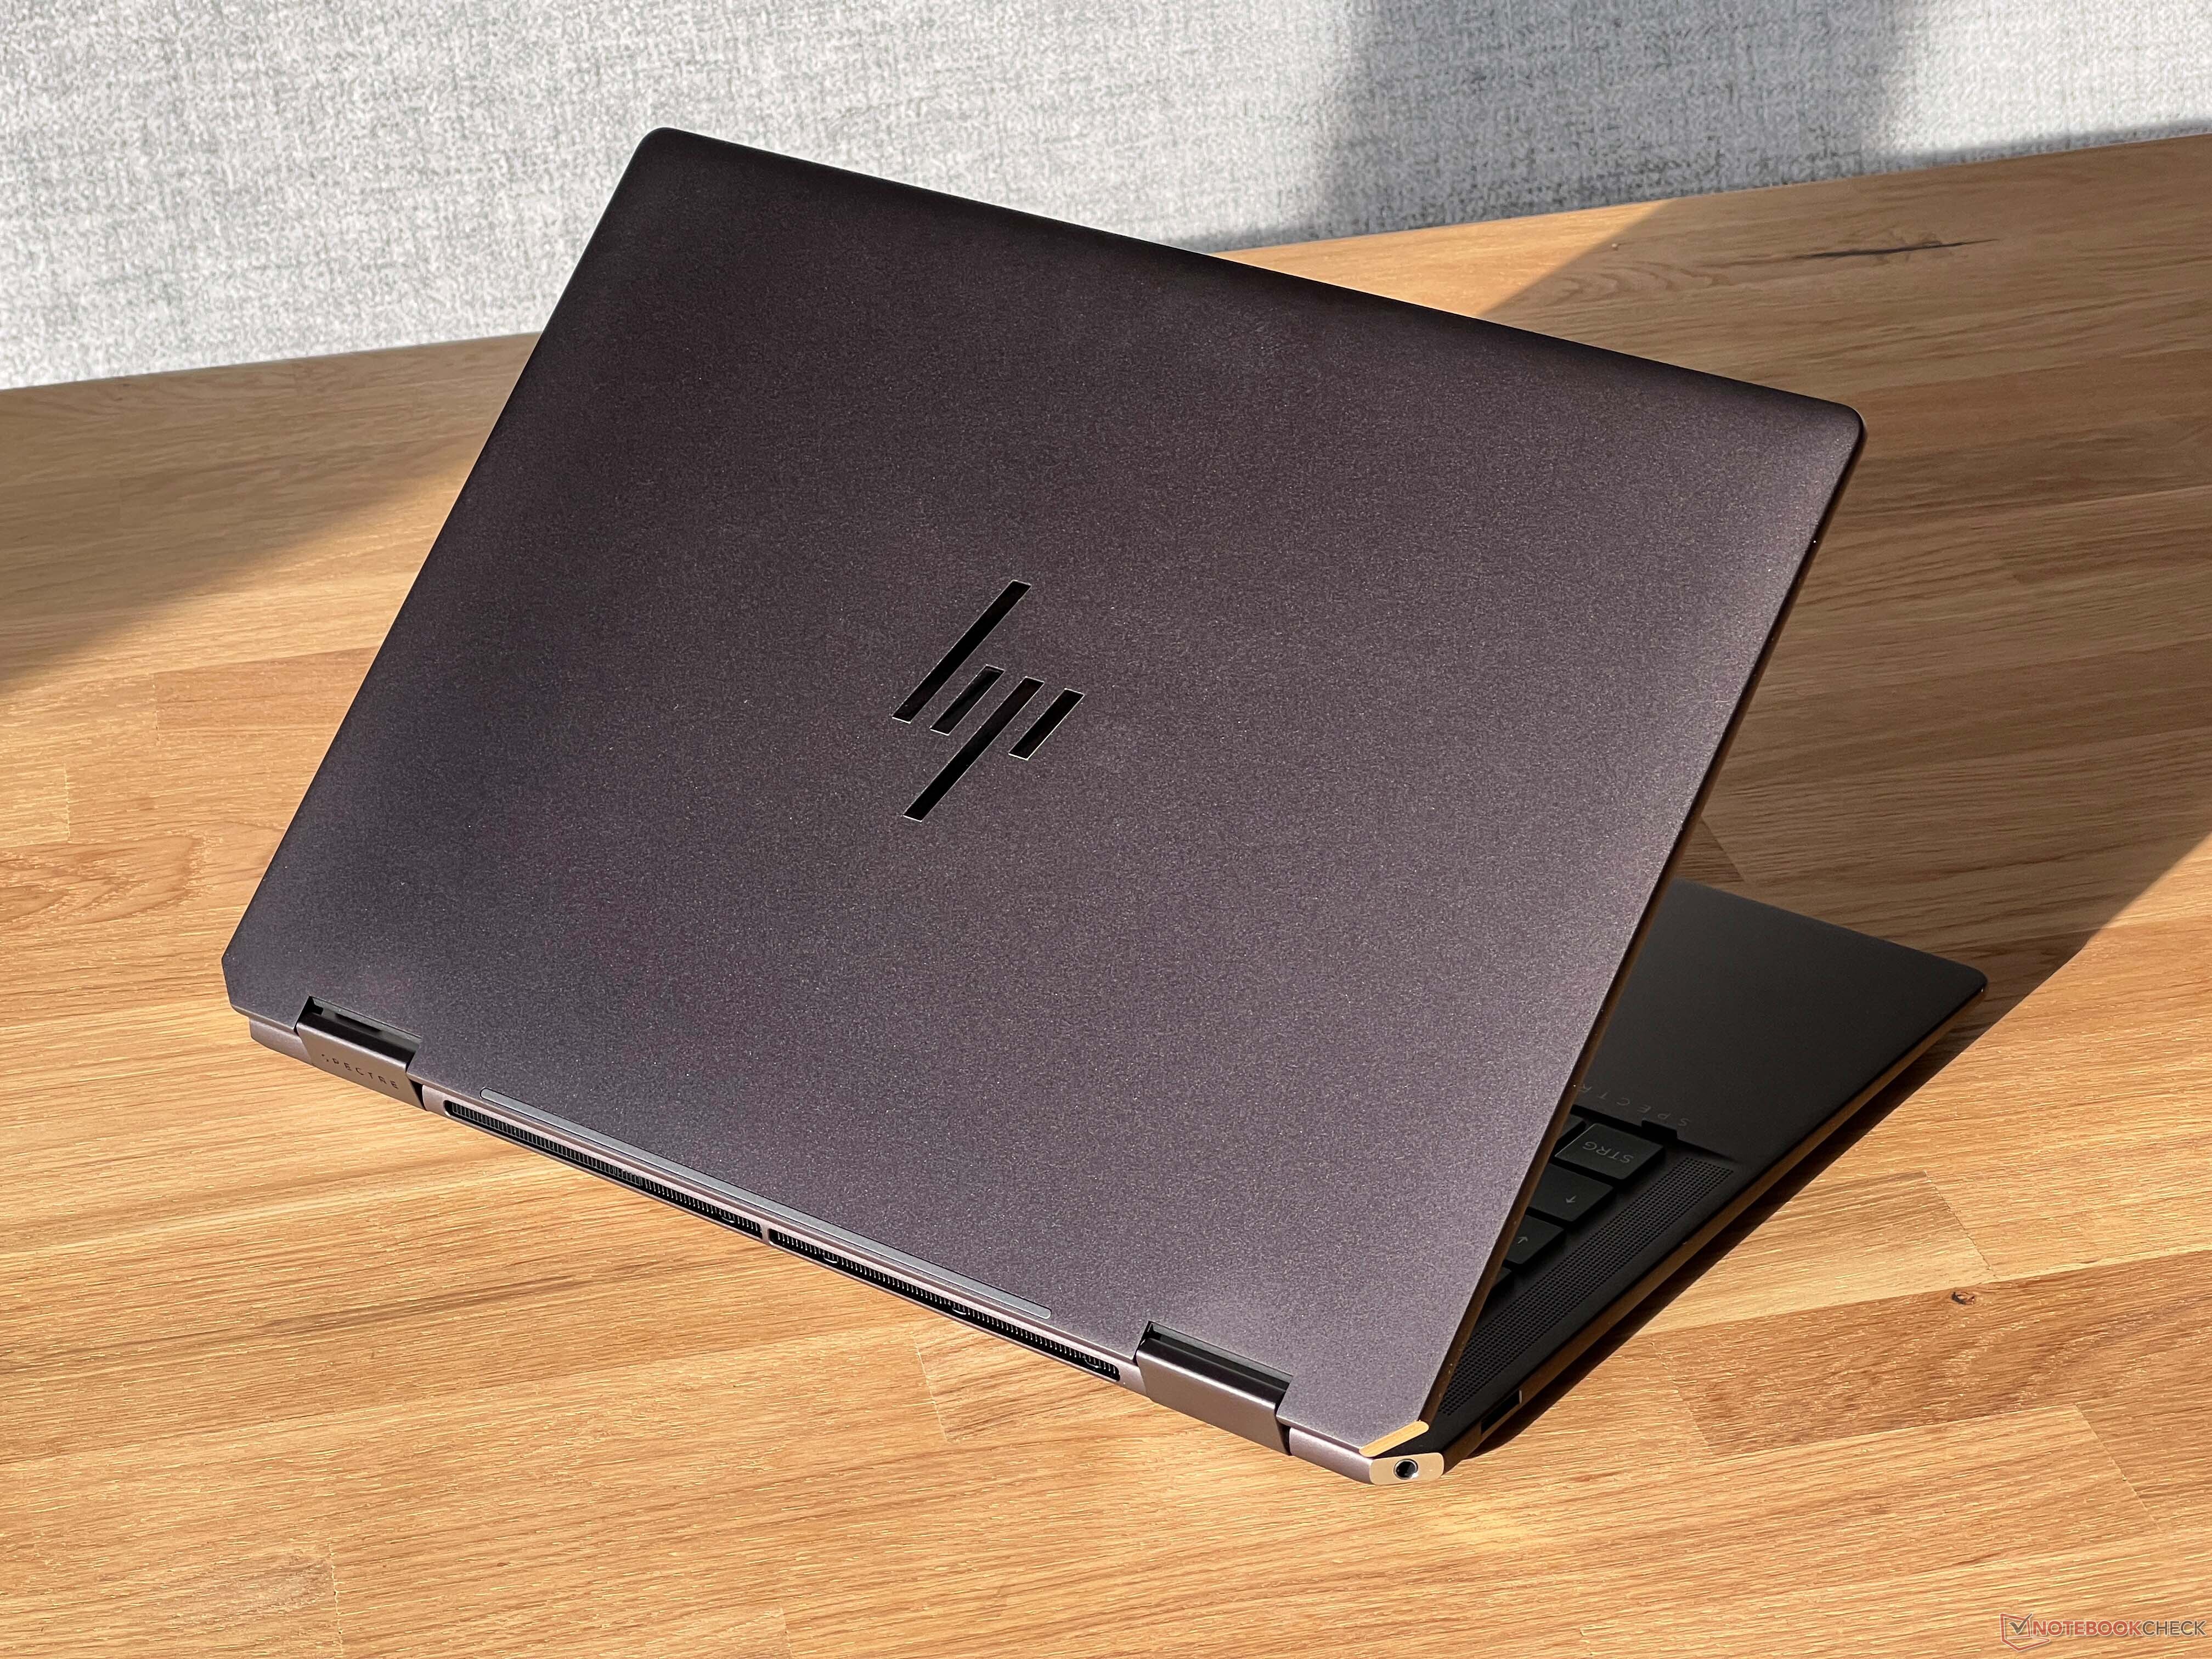 Latest HP Spectre x360 14 review highlights enhanced viewing experience with 120-Hz display